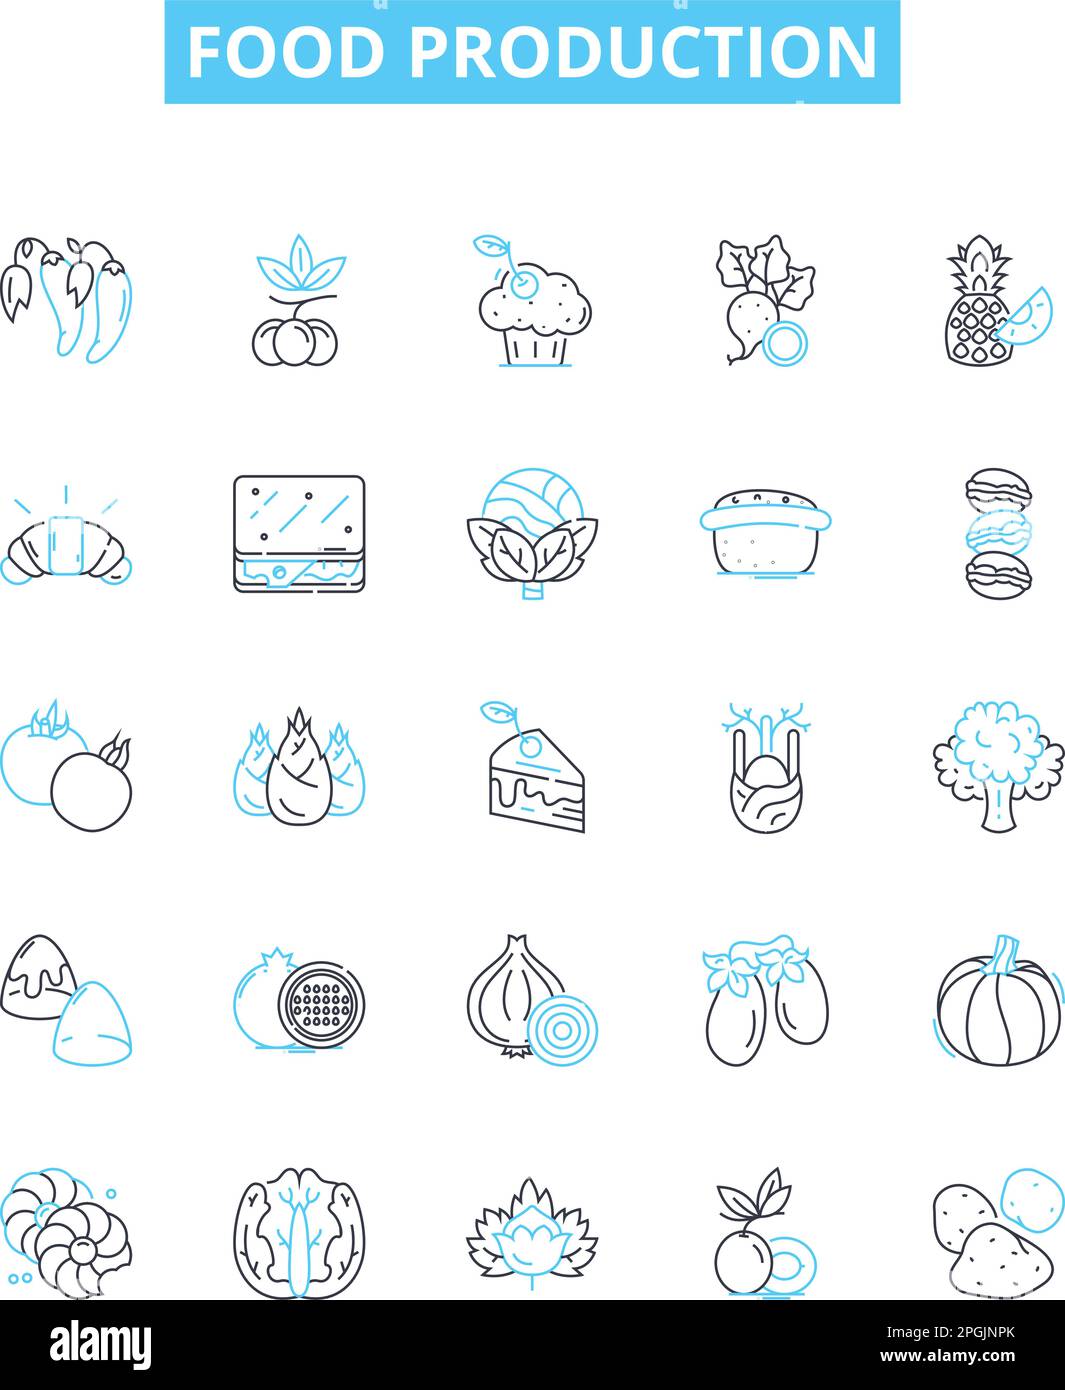 Food production vector line icons set. Farming, Agriculture, Processed, Production, Packaging, Quality, Culinary illustration outline concept symbols Stock Vector